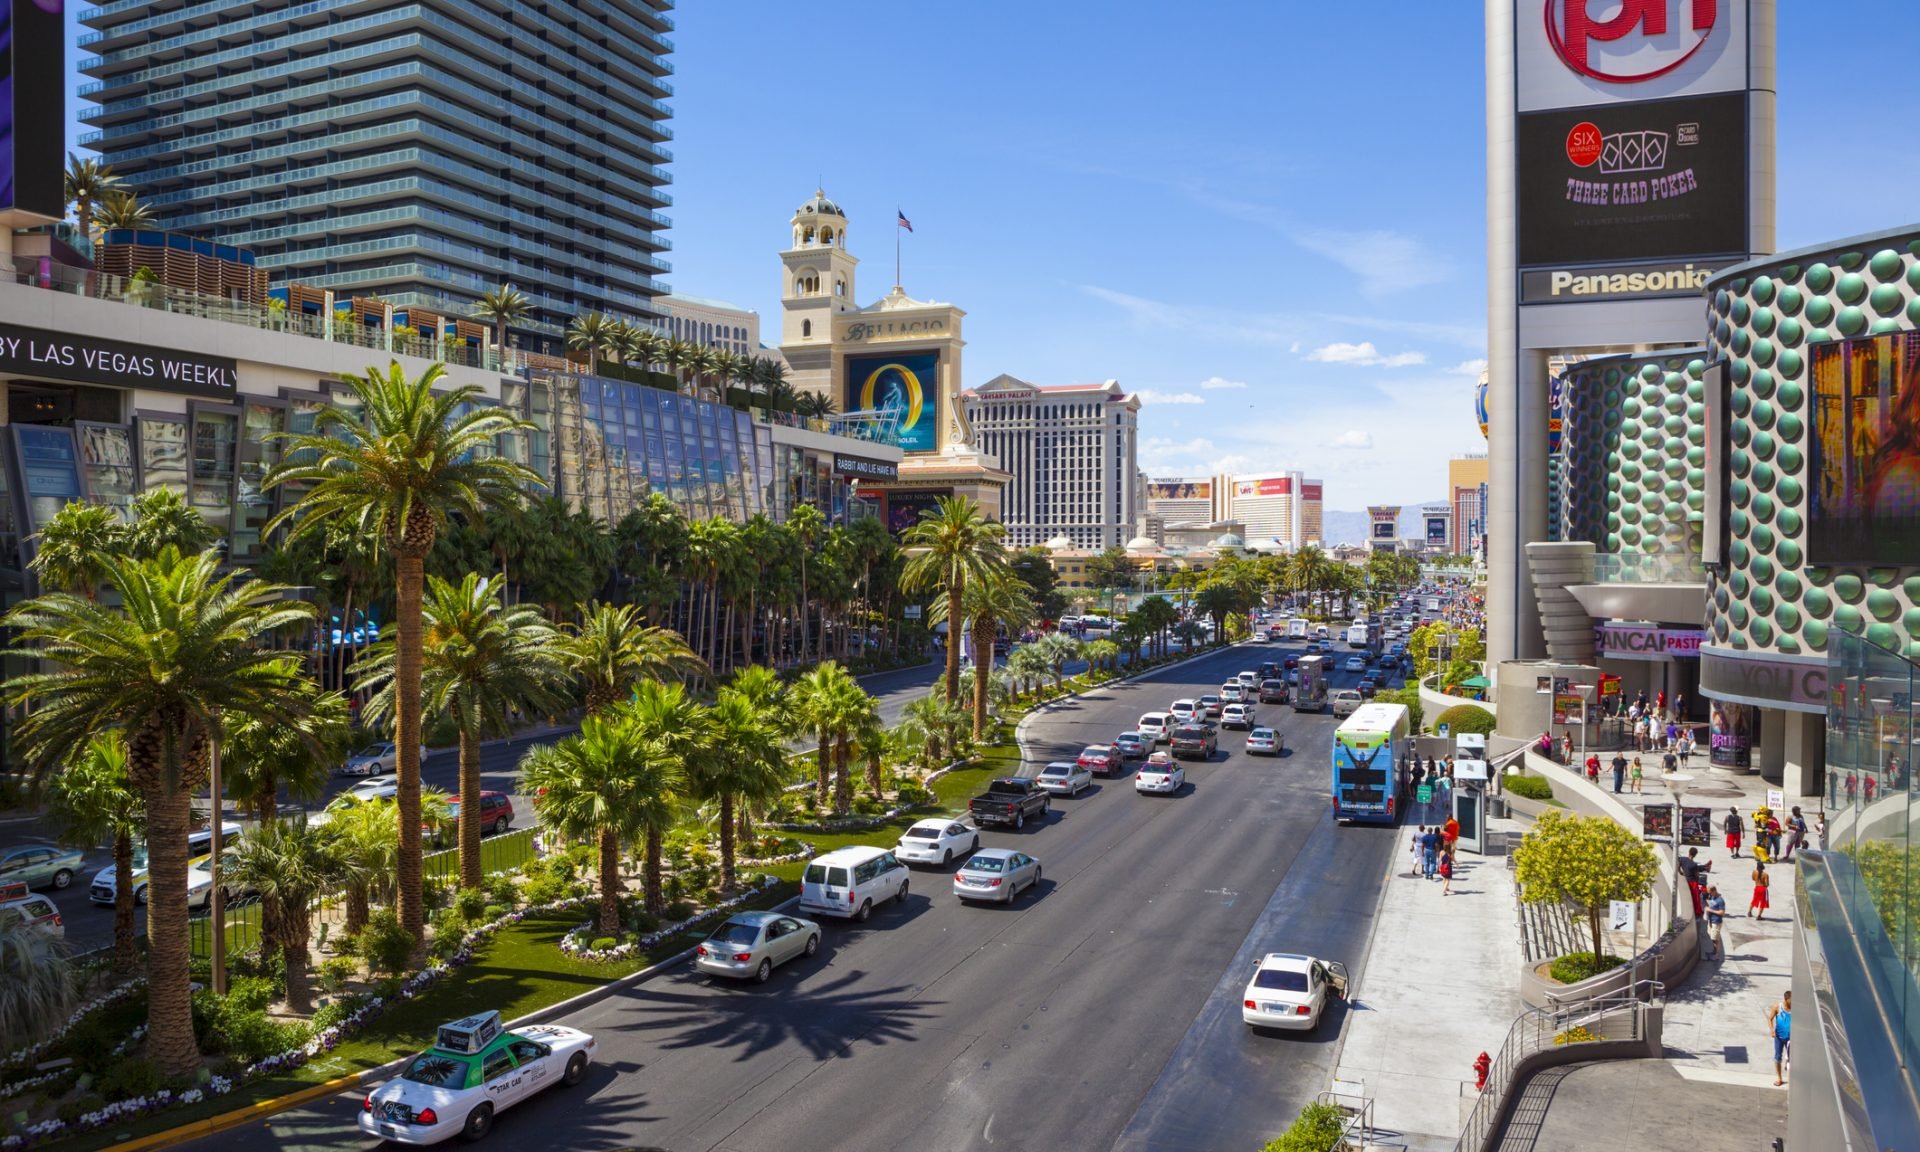 Which Vegas Experience Fits Your Persona?